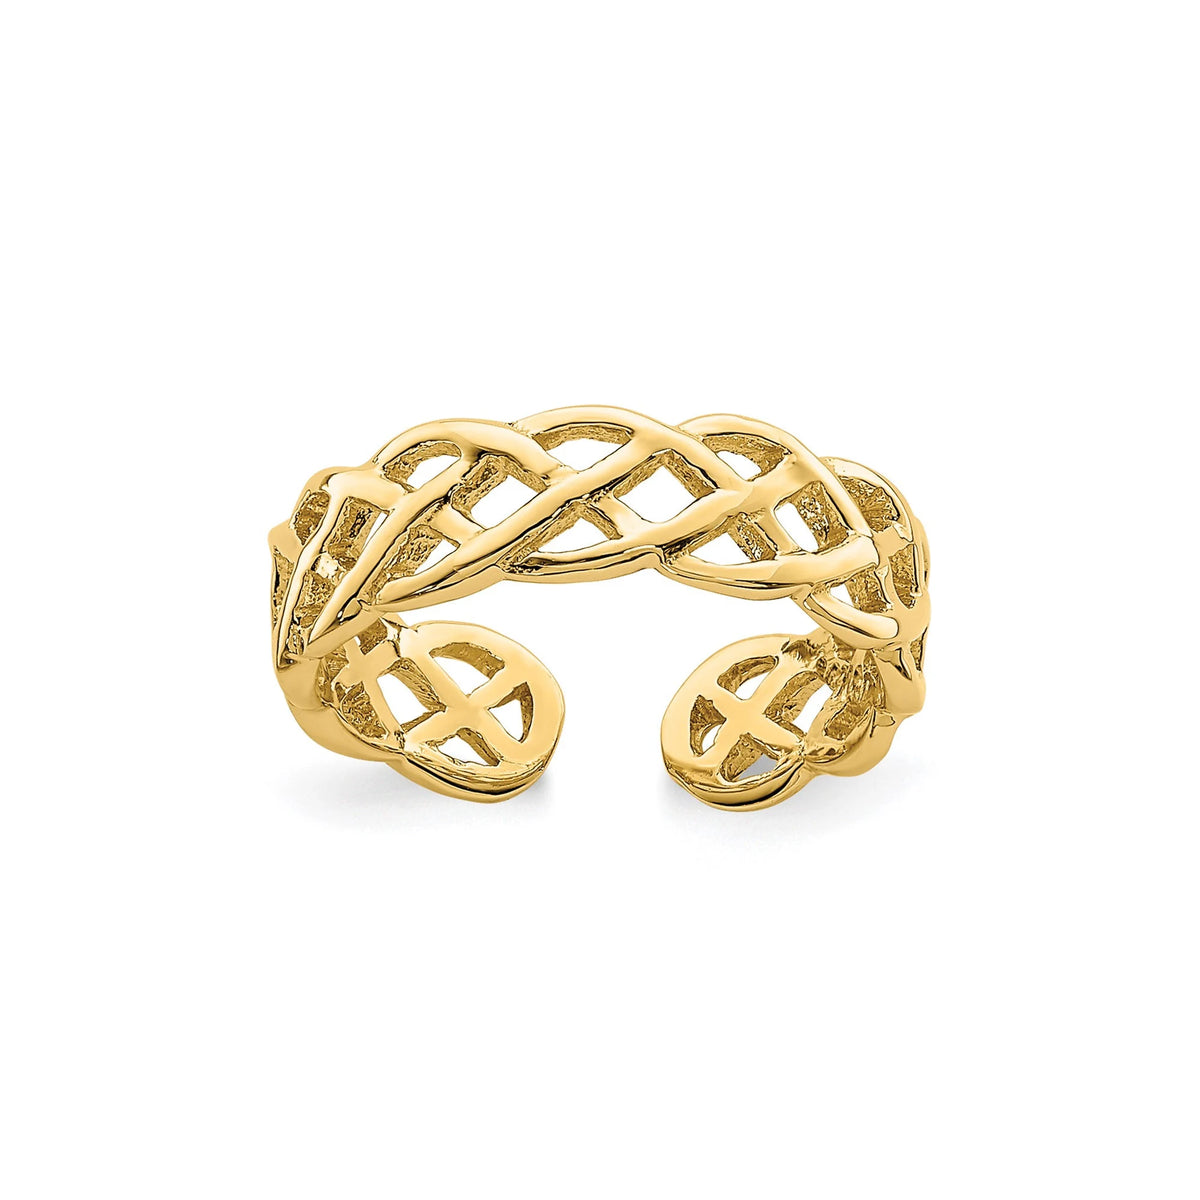 14k Yellow Braided Toe Ring 4.35mm Band  - Gift Box Included - Made in U.S.A.